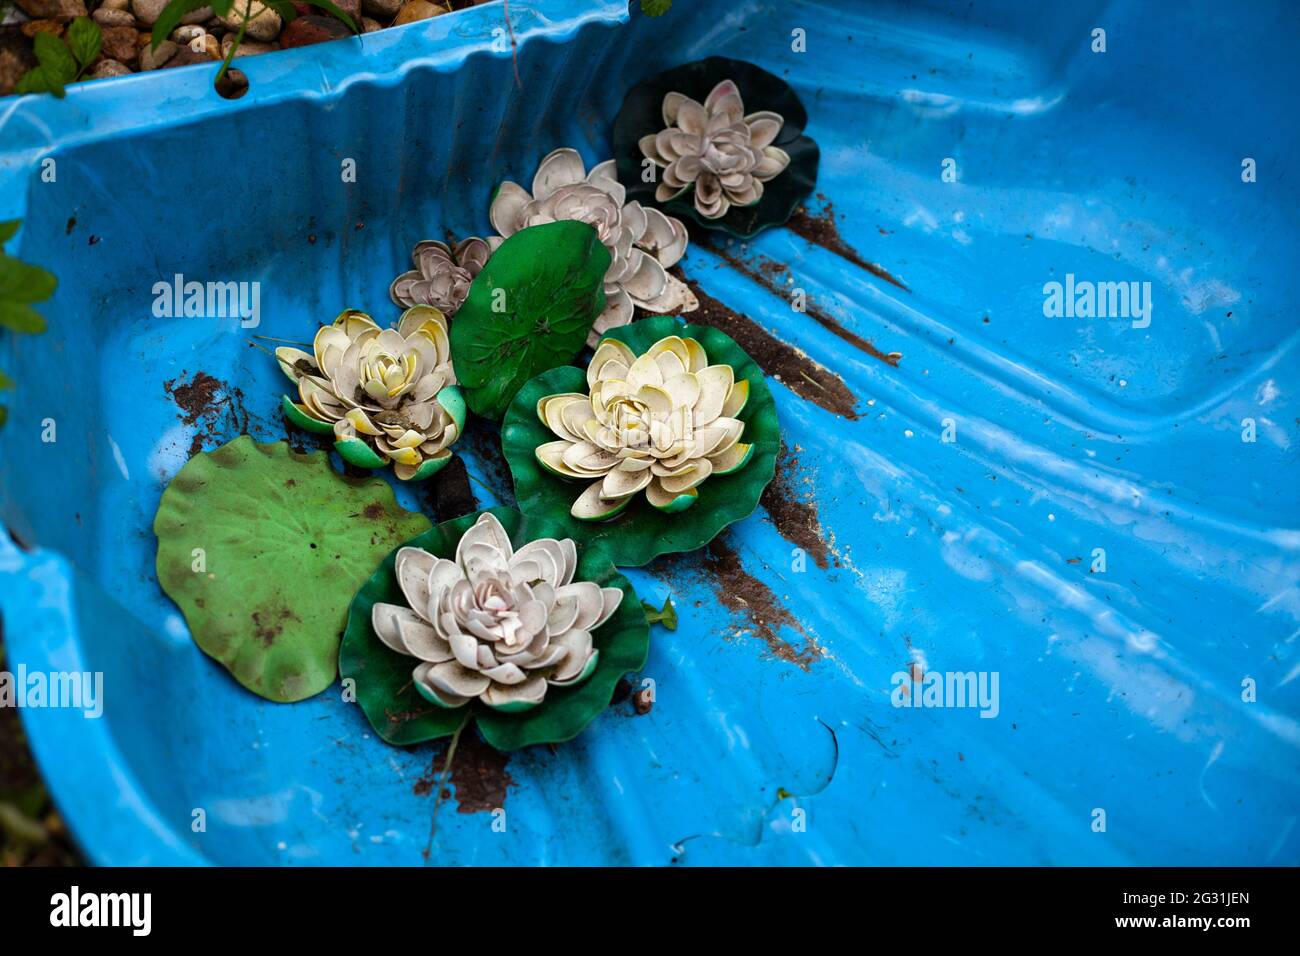 Dirty lotus pool. Artificial lotuses decorate the pond. Abandoned pool in the garden. Bath without water at the summer cottage. Stock Photo